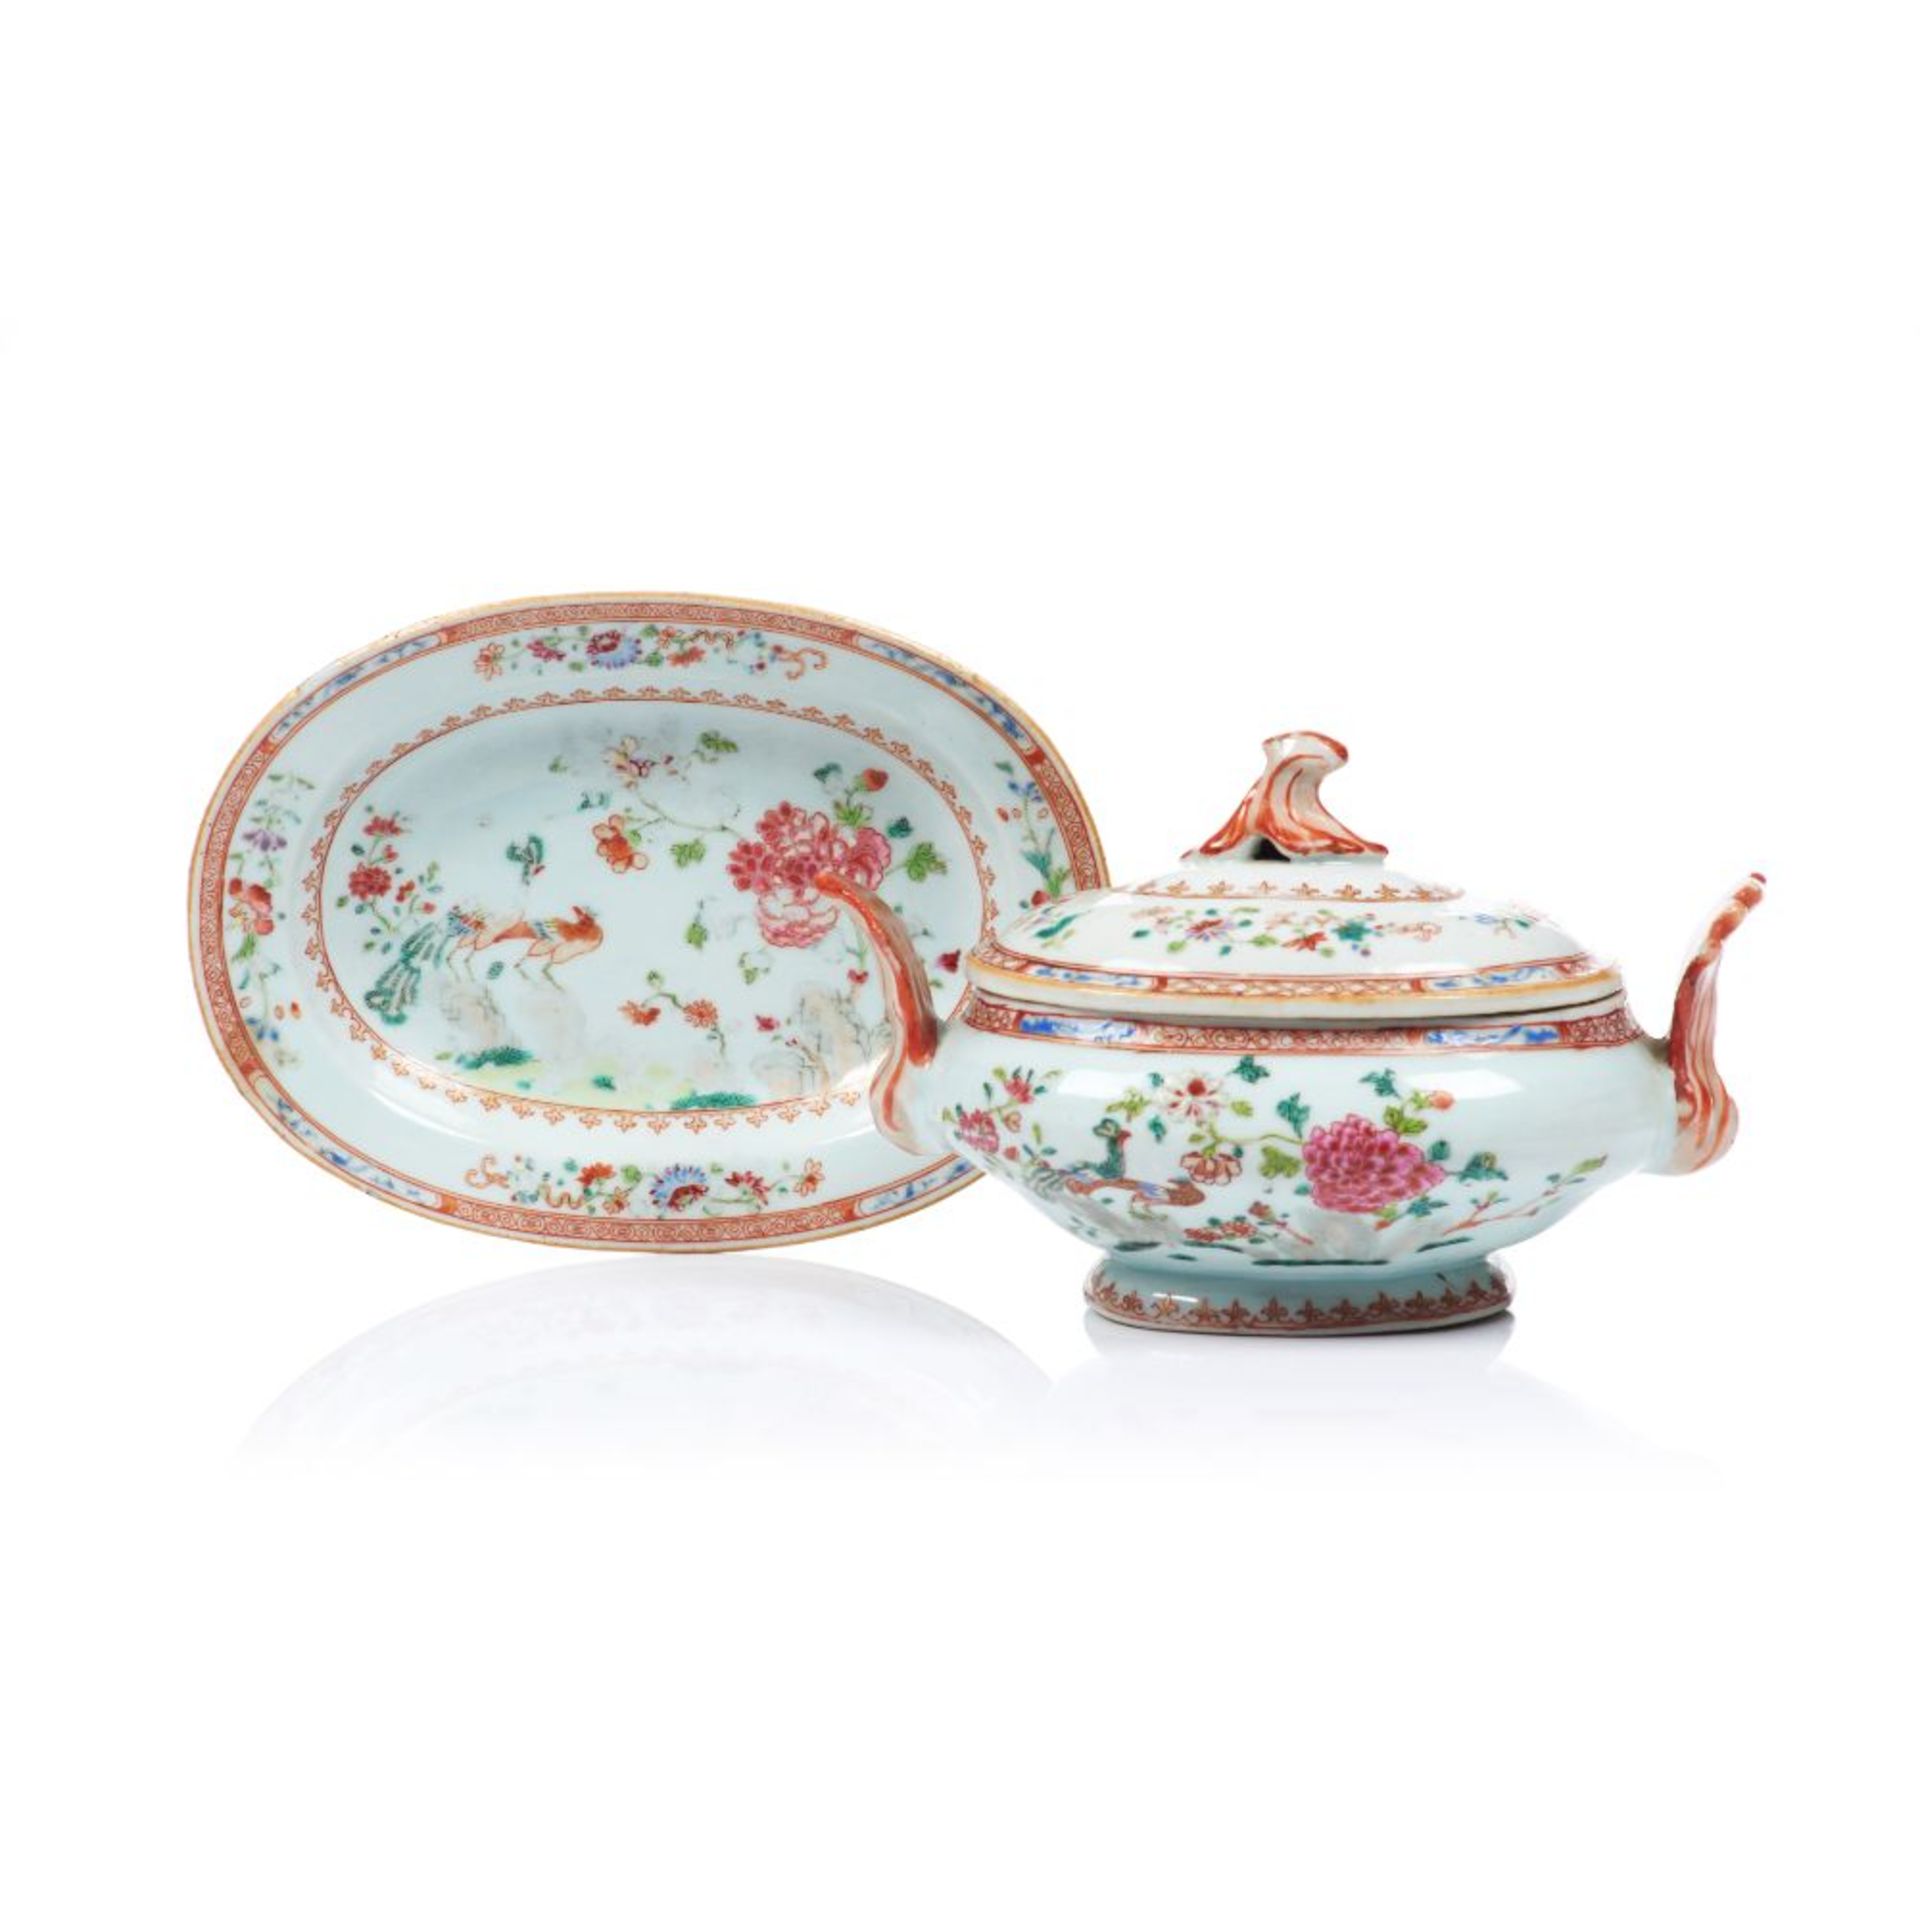 A small tureen with cover and tray, Chinese export porcelain, Polychrome "Famille Rose" enamelled,